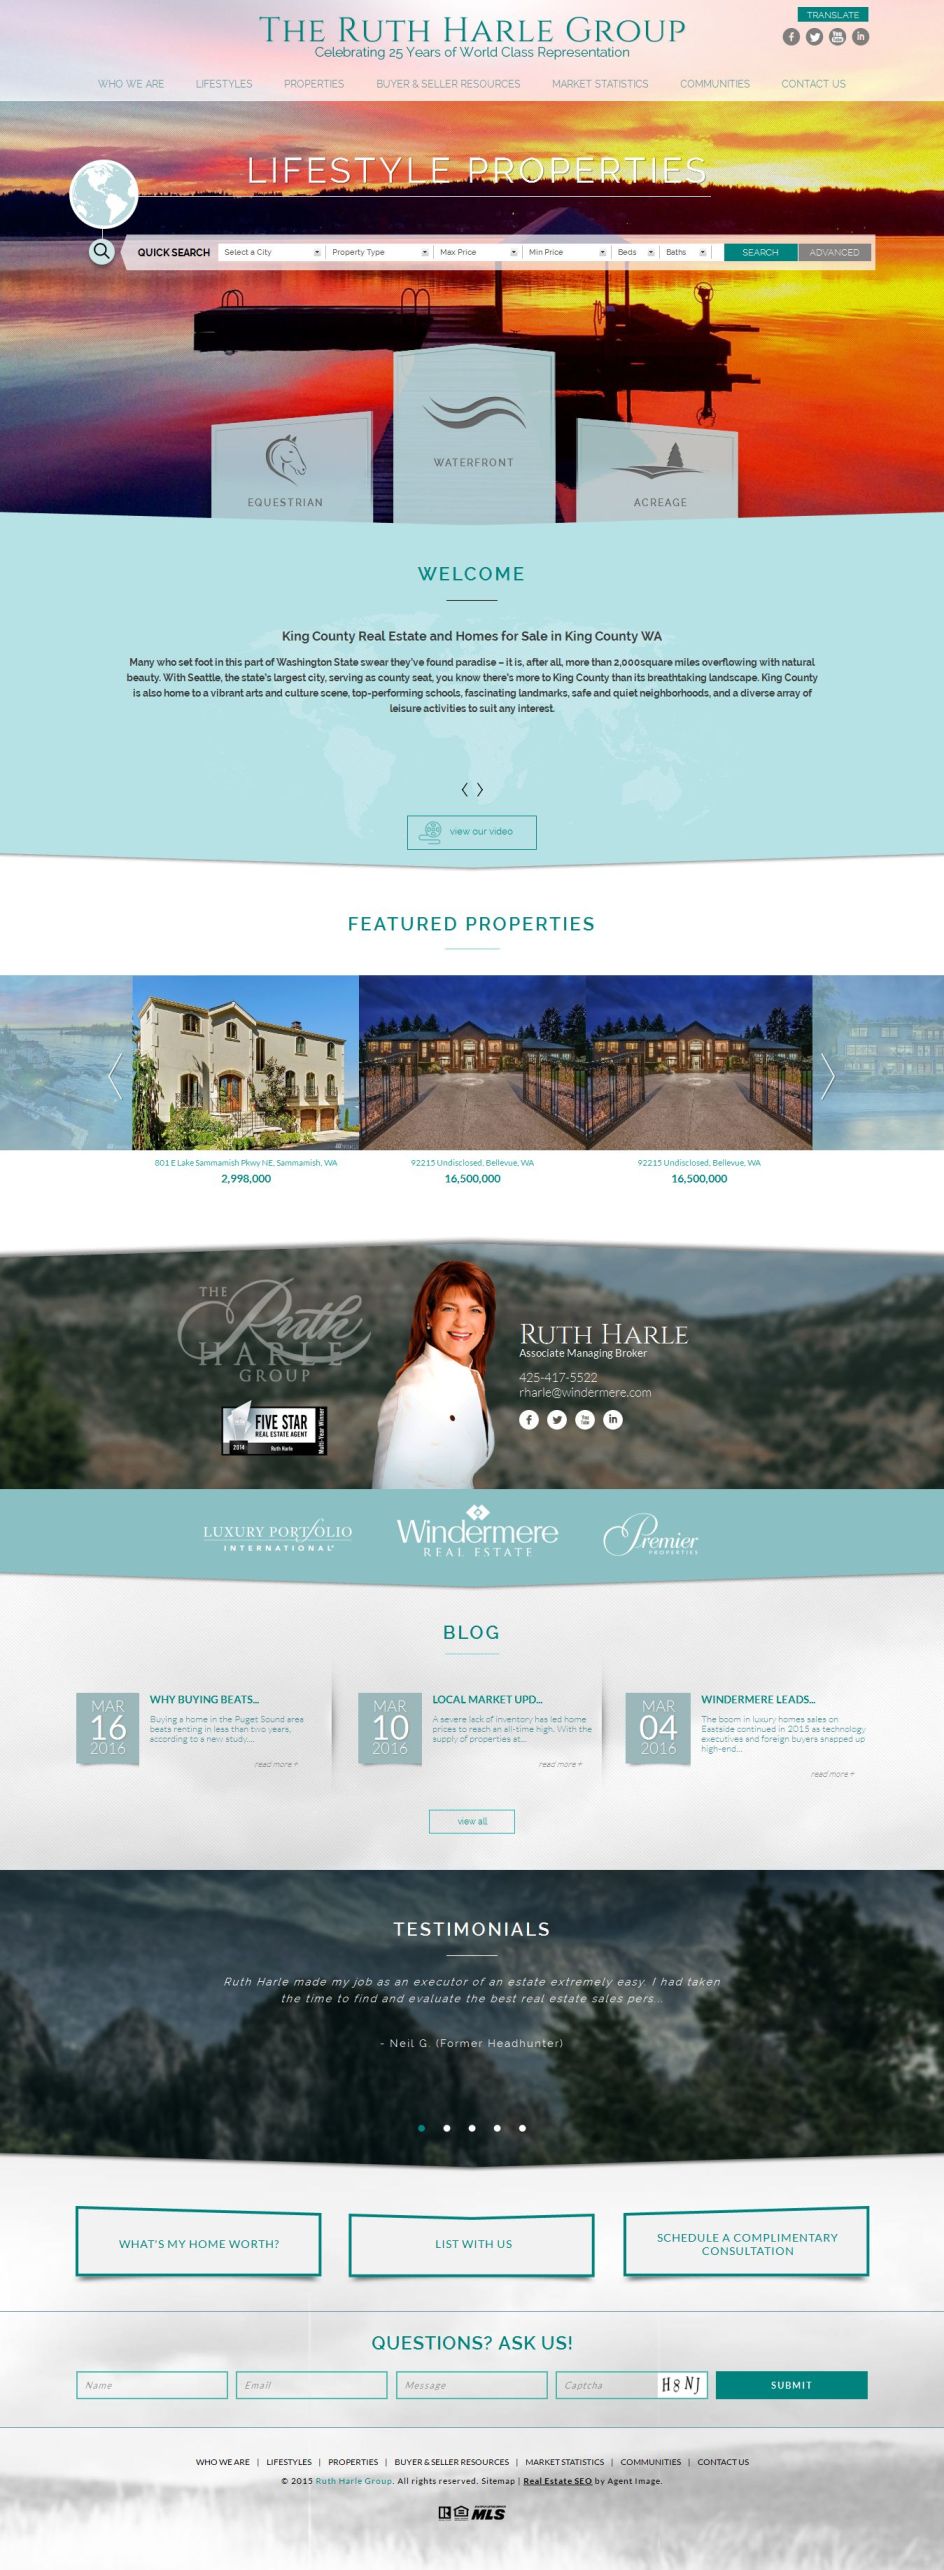 The Ruth Harle Group website